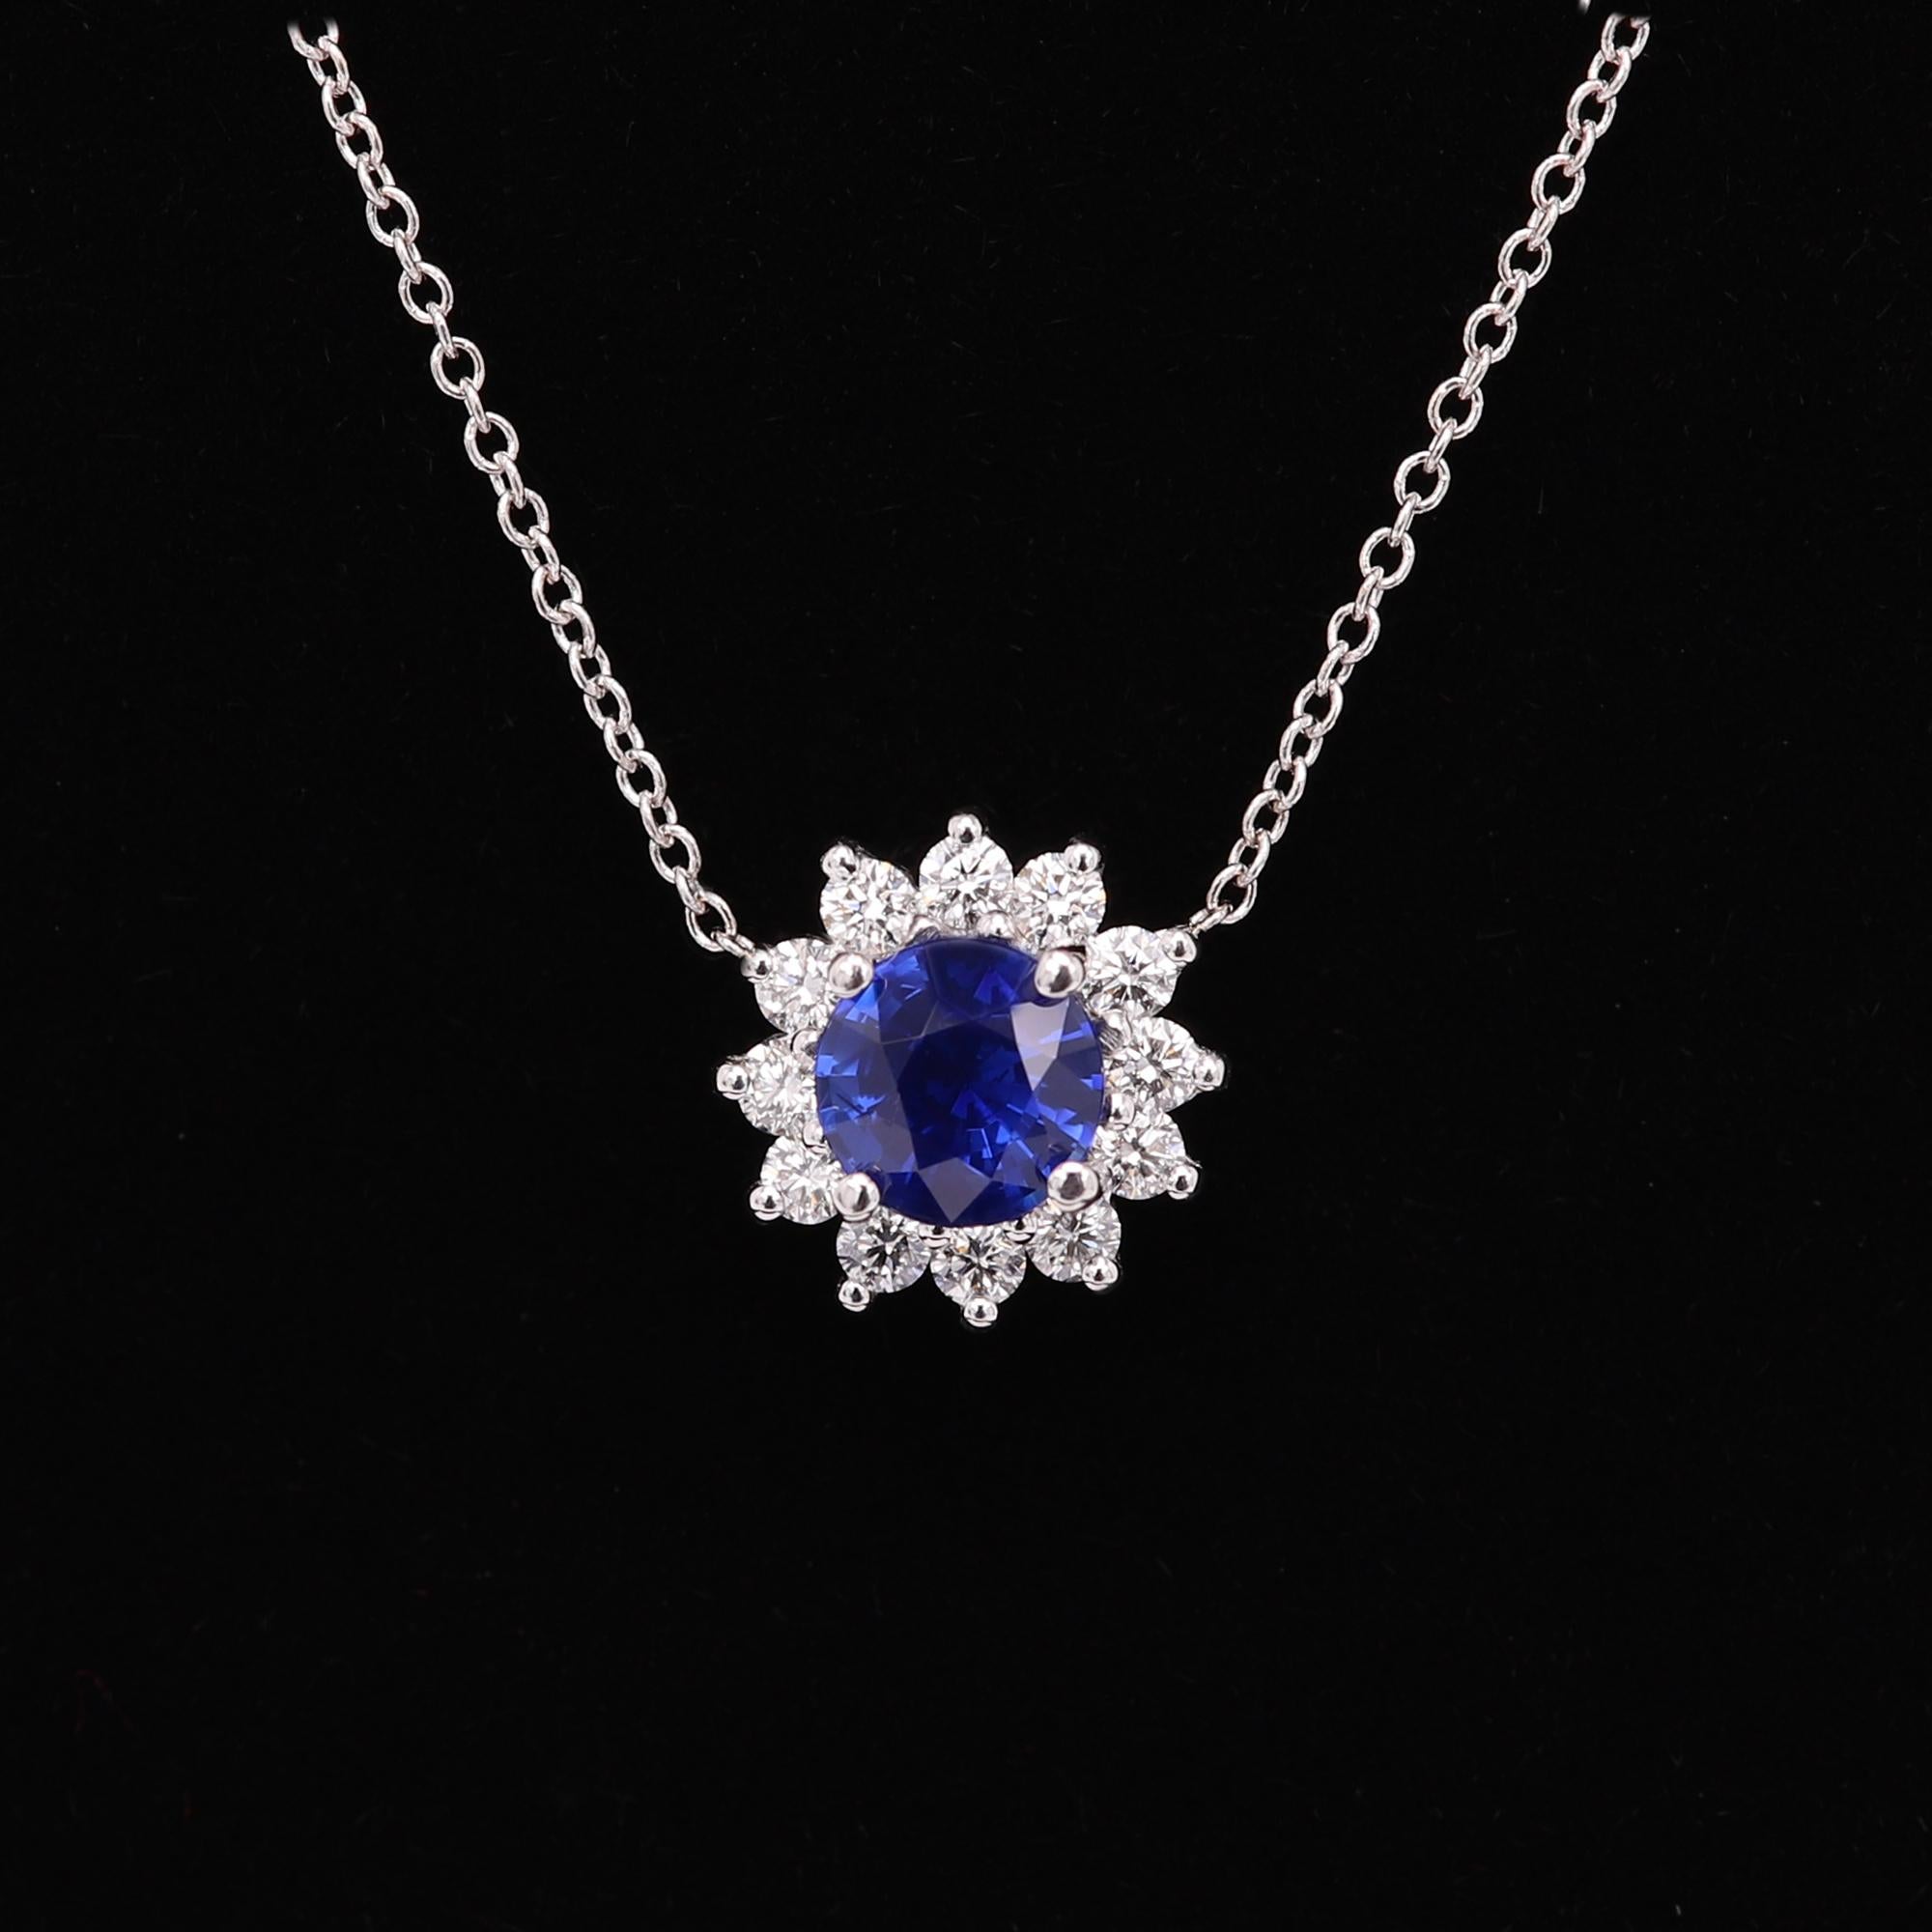 A true brilliant pendant necklace jewelry 
With a unique round blue sapphire approx size 1.00 carat (6.0 mm) AAA
The sapphire is a Natural common heated with a deep Blue color and Good Luster.  
The round shape sapphire is an uncommon shape for